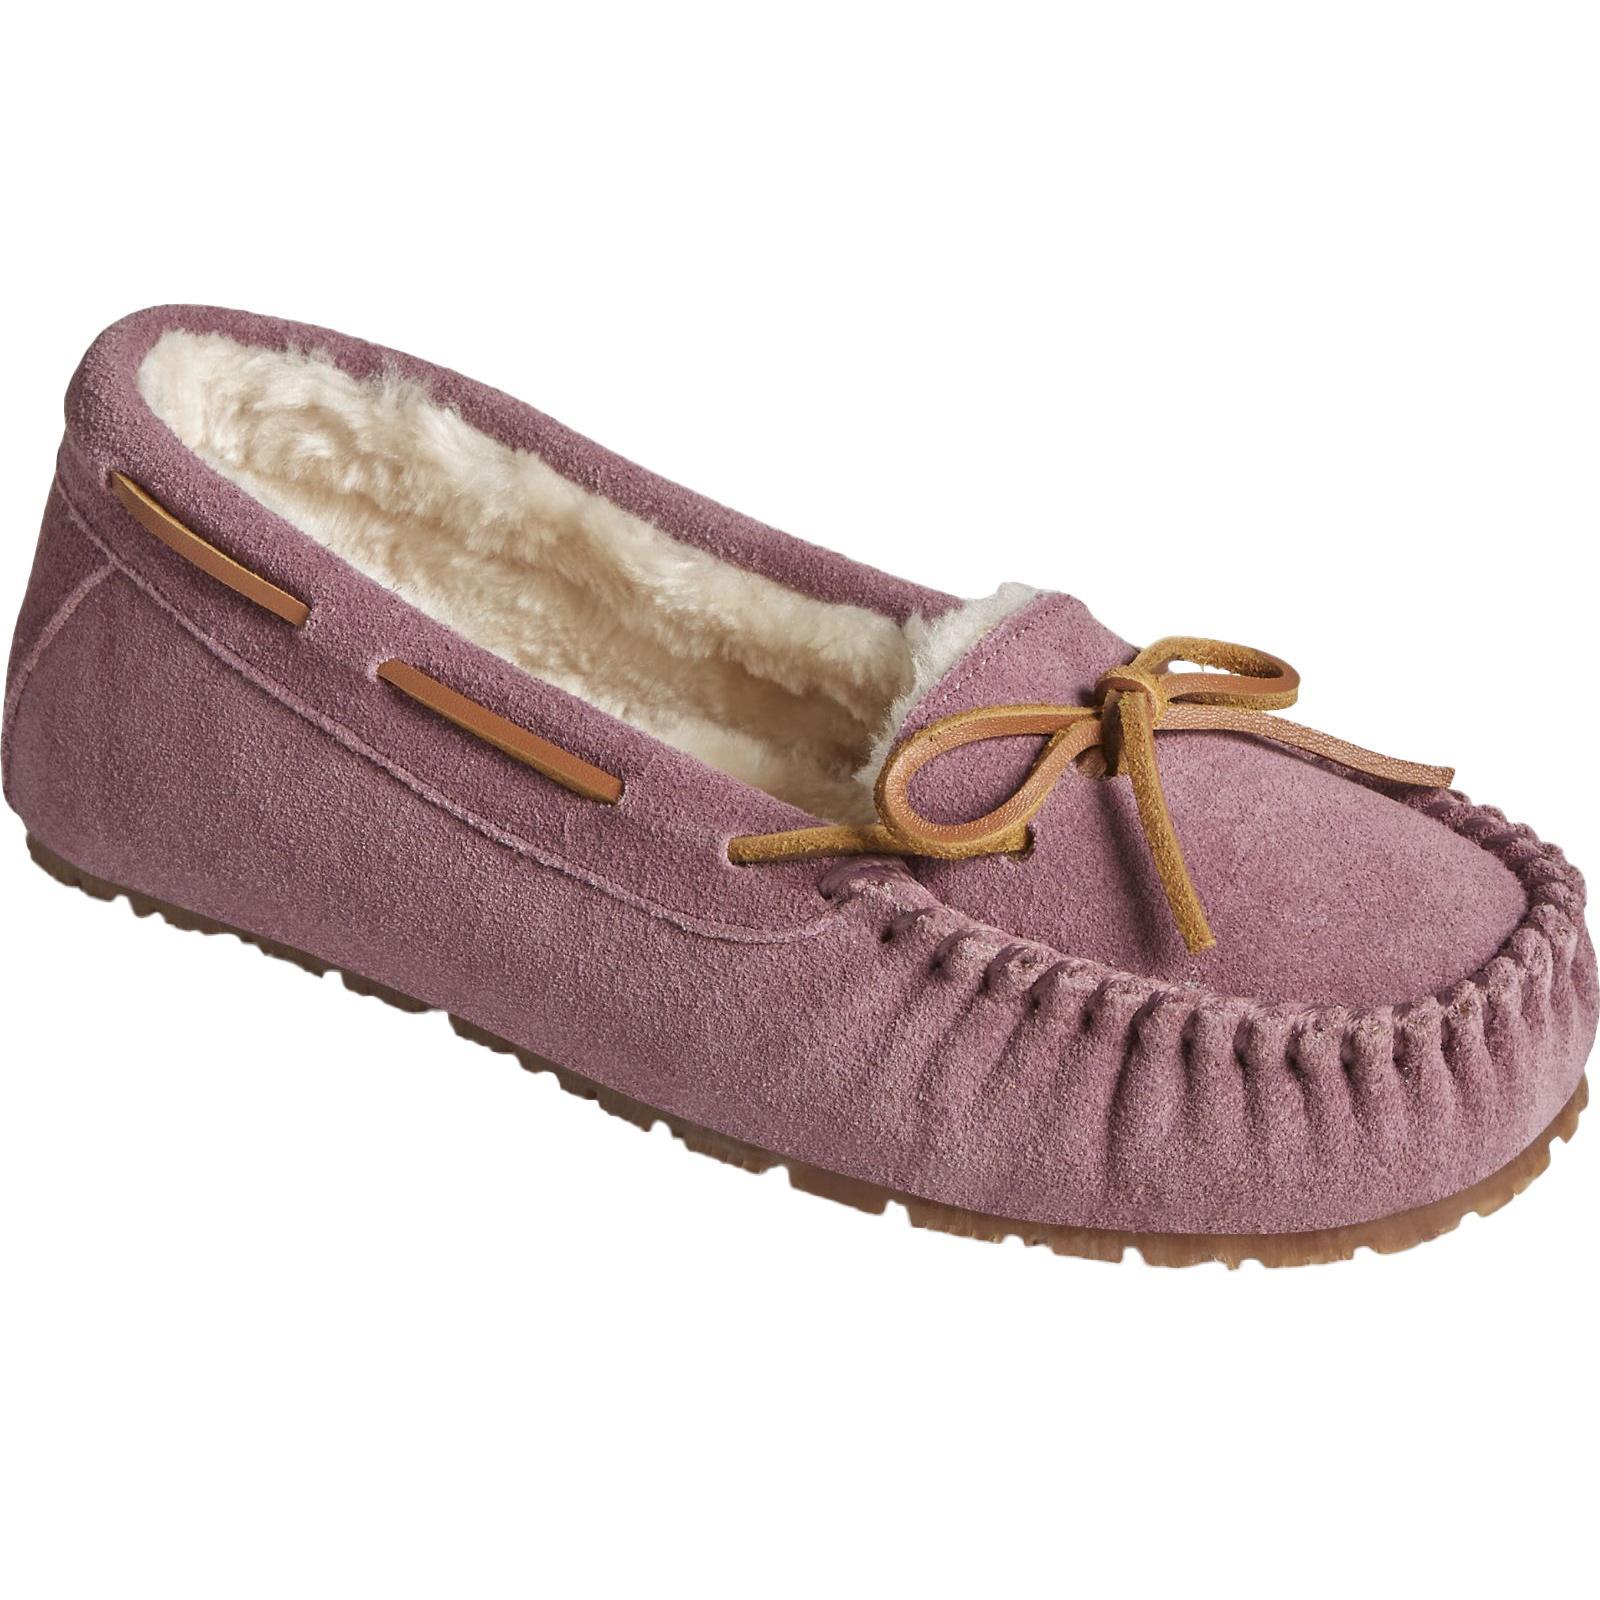 Sperry Womens/Ladies Reina Suede Slippers (Mauve) (7 UK)